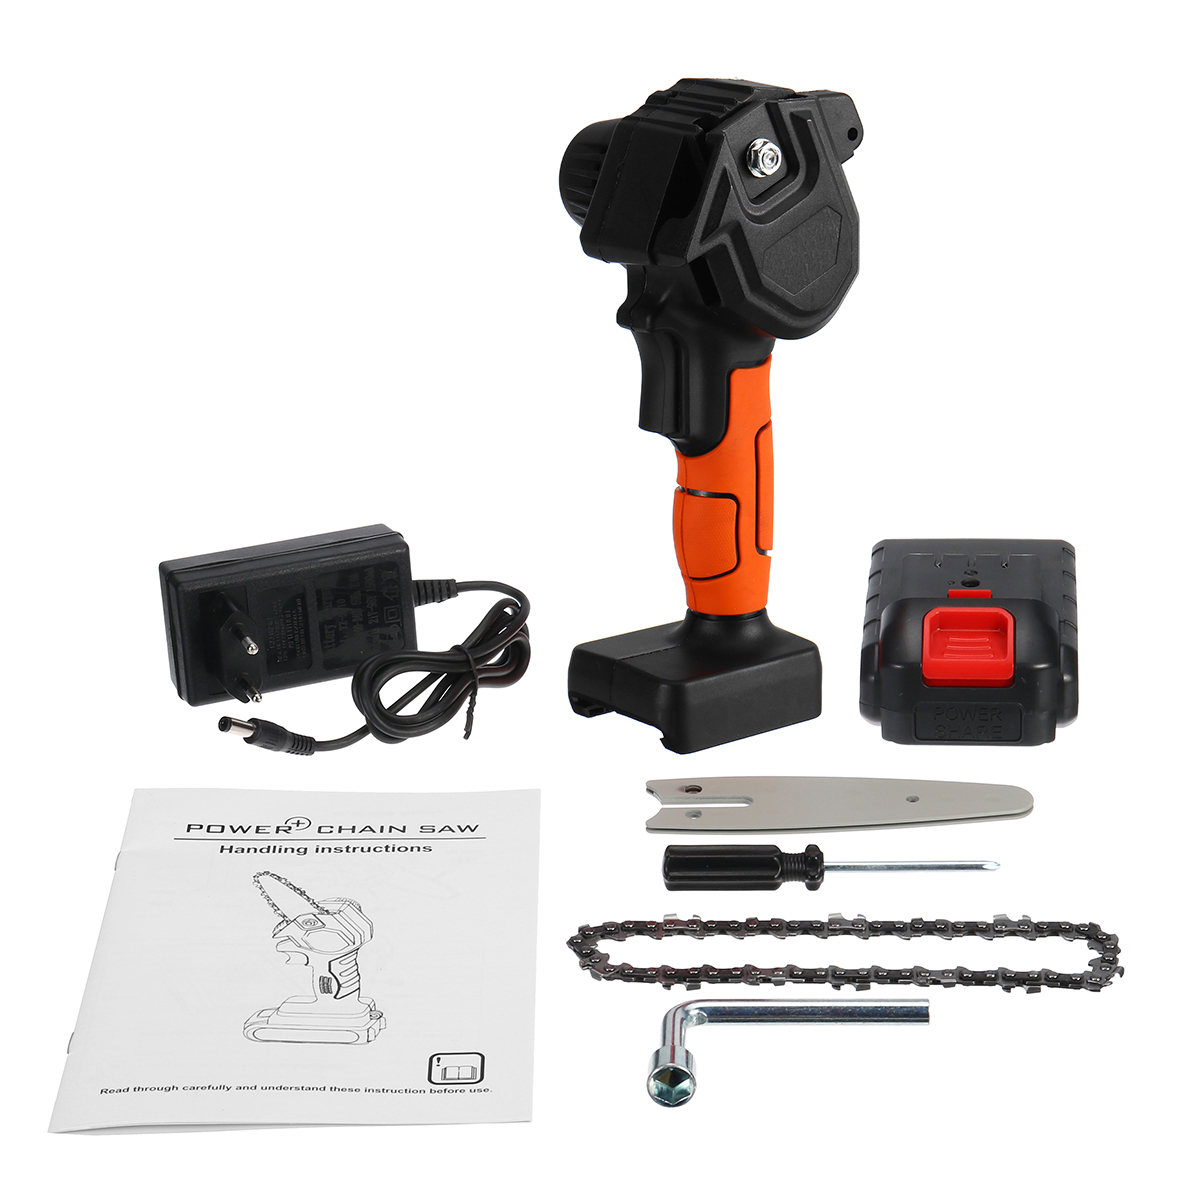 220V-Mini-Chainsaw-Cordless-Electric-Portable-Saw-Hand-held-Rechargeable-Electric-Logging-Saw-With-B-1787028-6